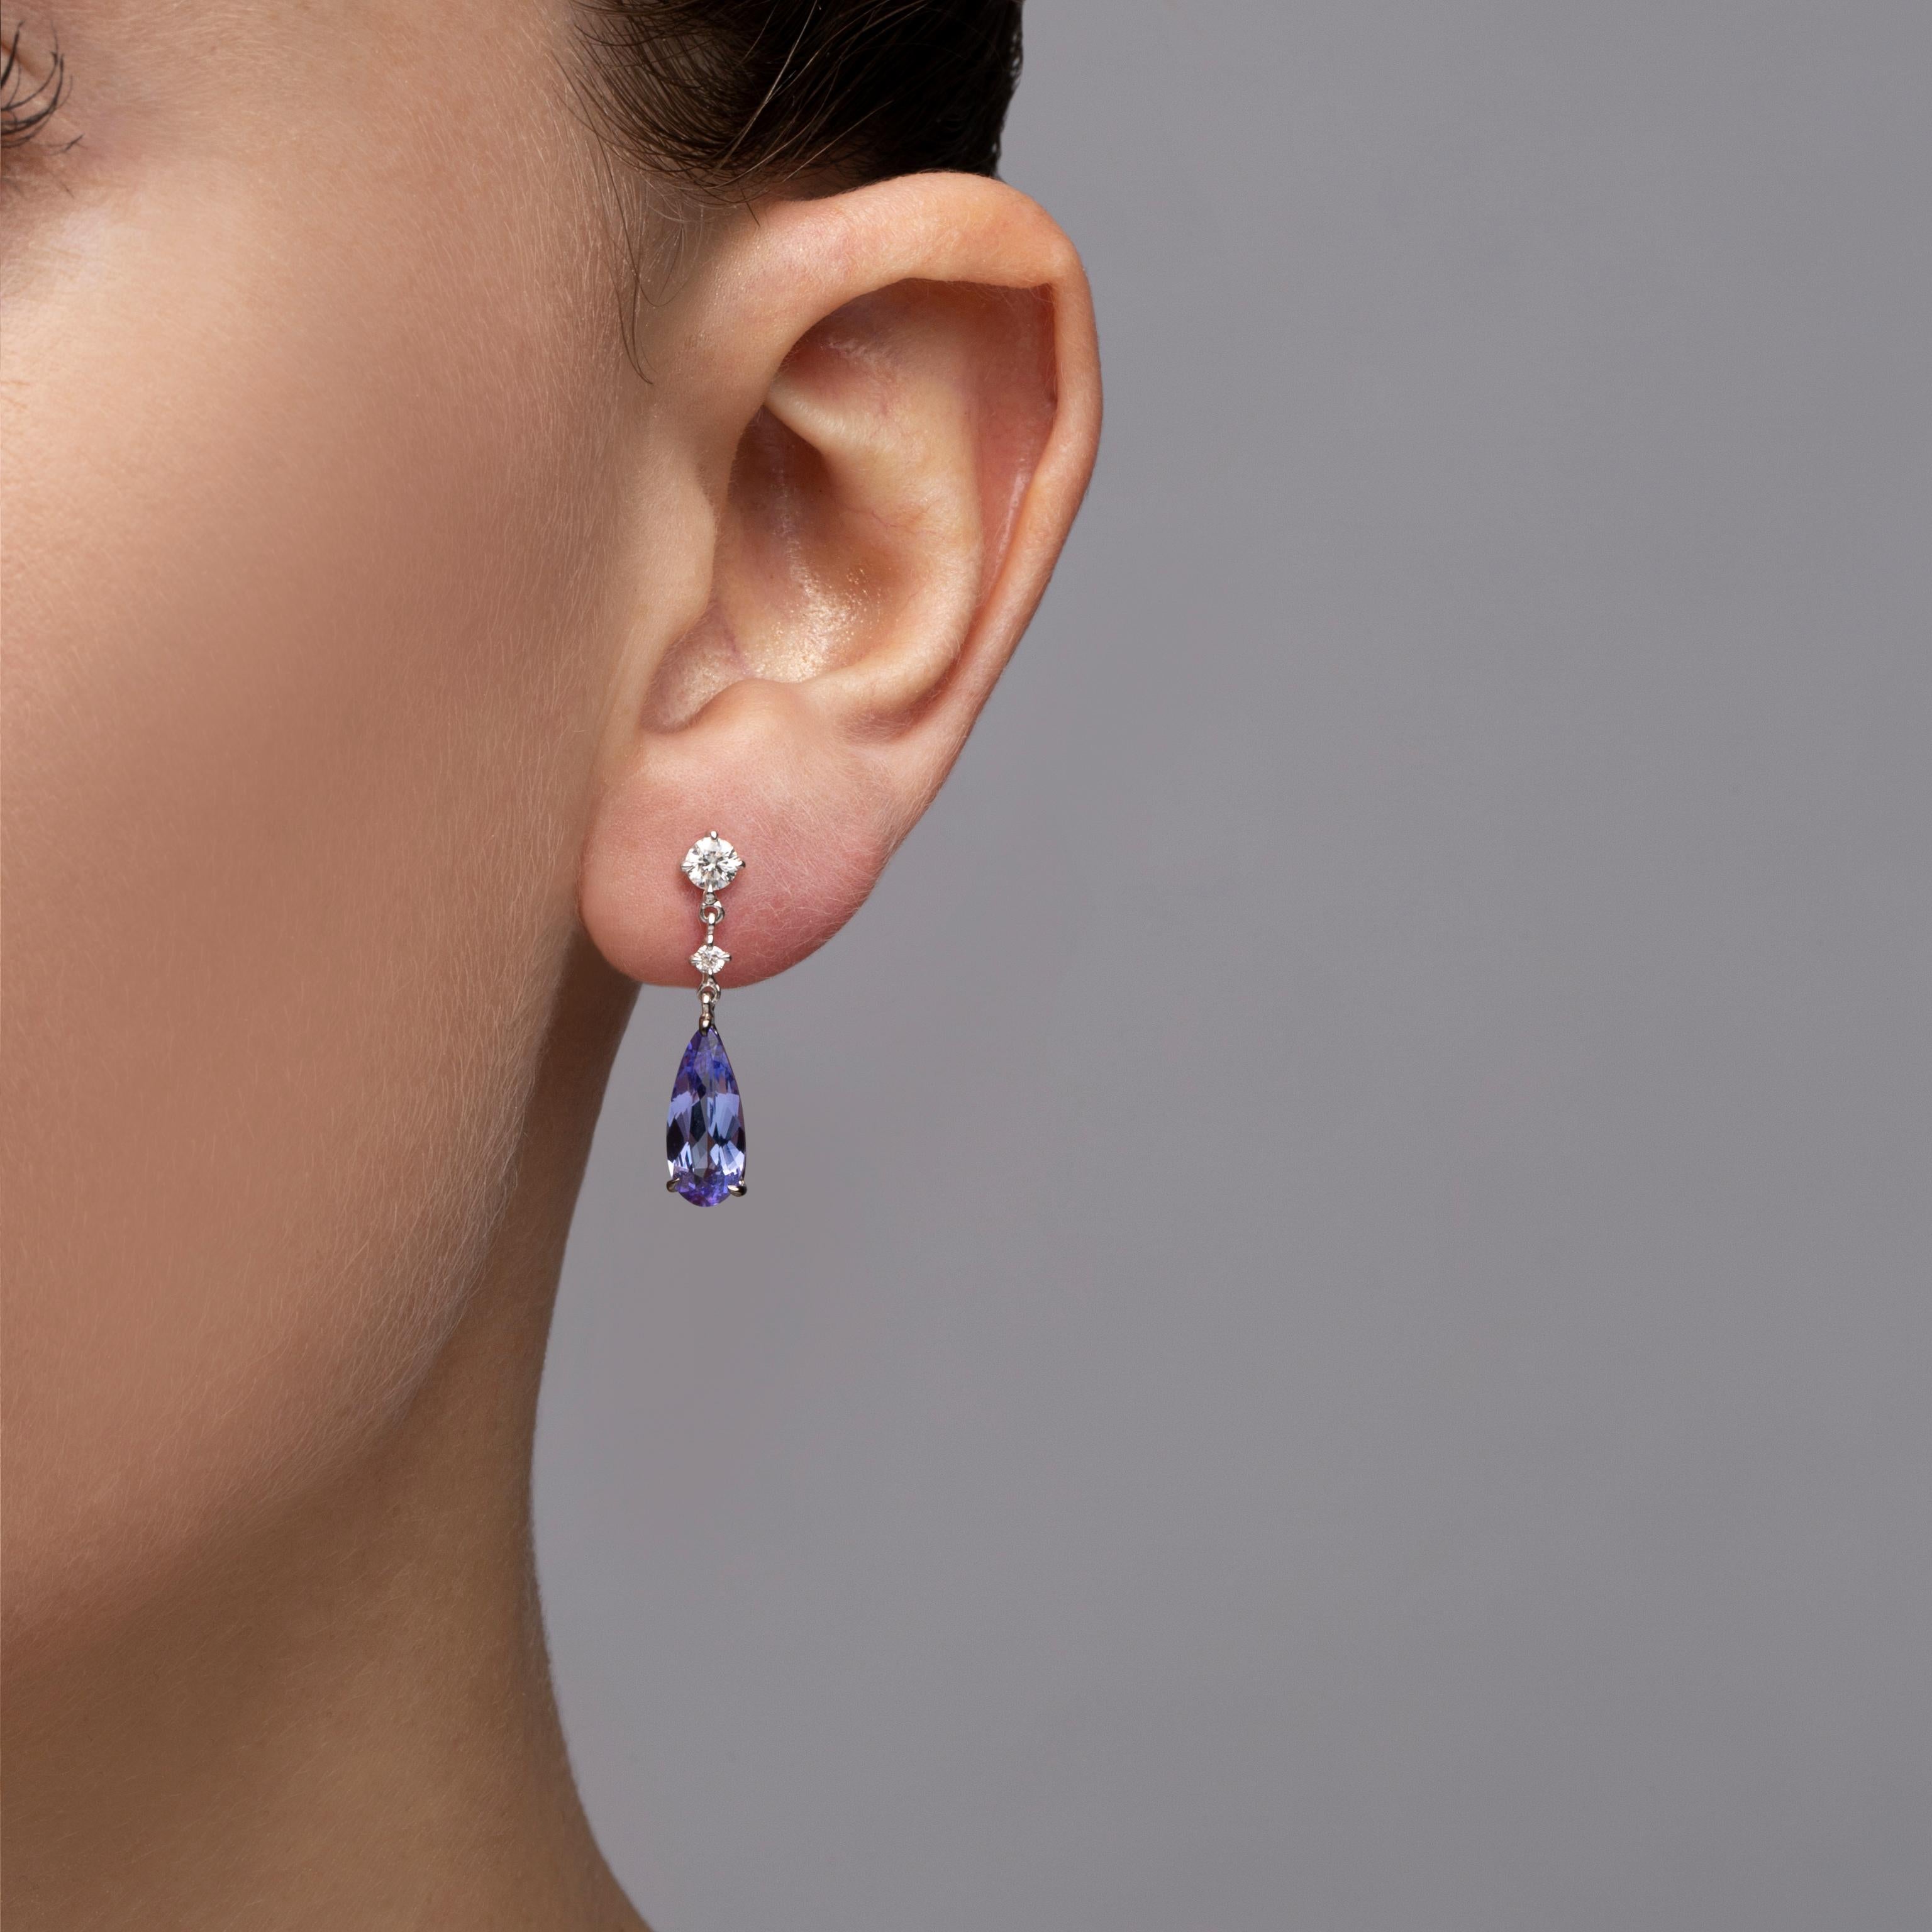 Alex Jona design collection, hand crafted in Italy, 18 karat white gold drop earrings set with 2 drop cut Tanzanite weighing 3.65 carats and 0.47 carats of White Diamonds, F color, VVS1 clarity.
Dimensions: 1.02 in. H x 0.22 in. W x 0.14 in. D. - 